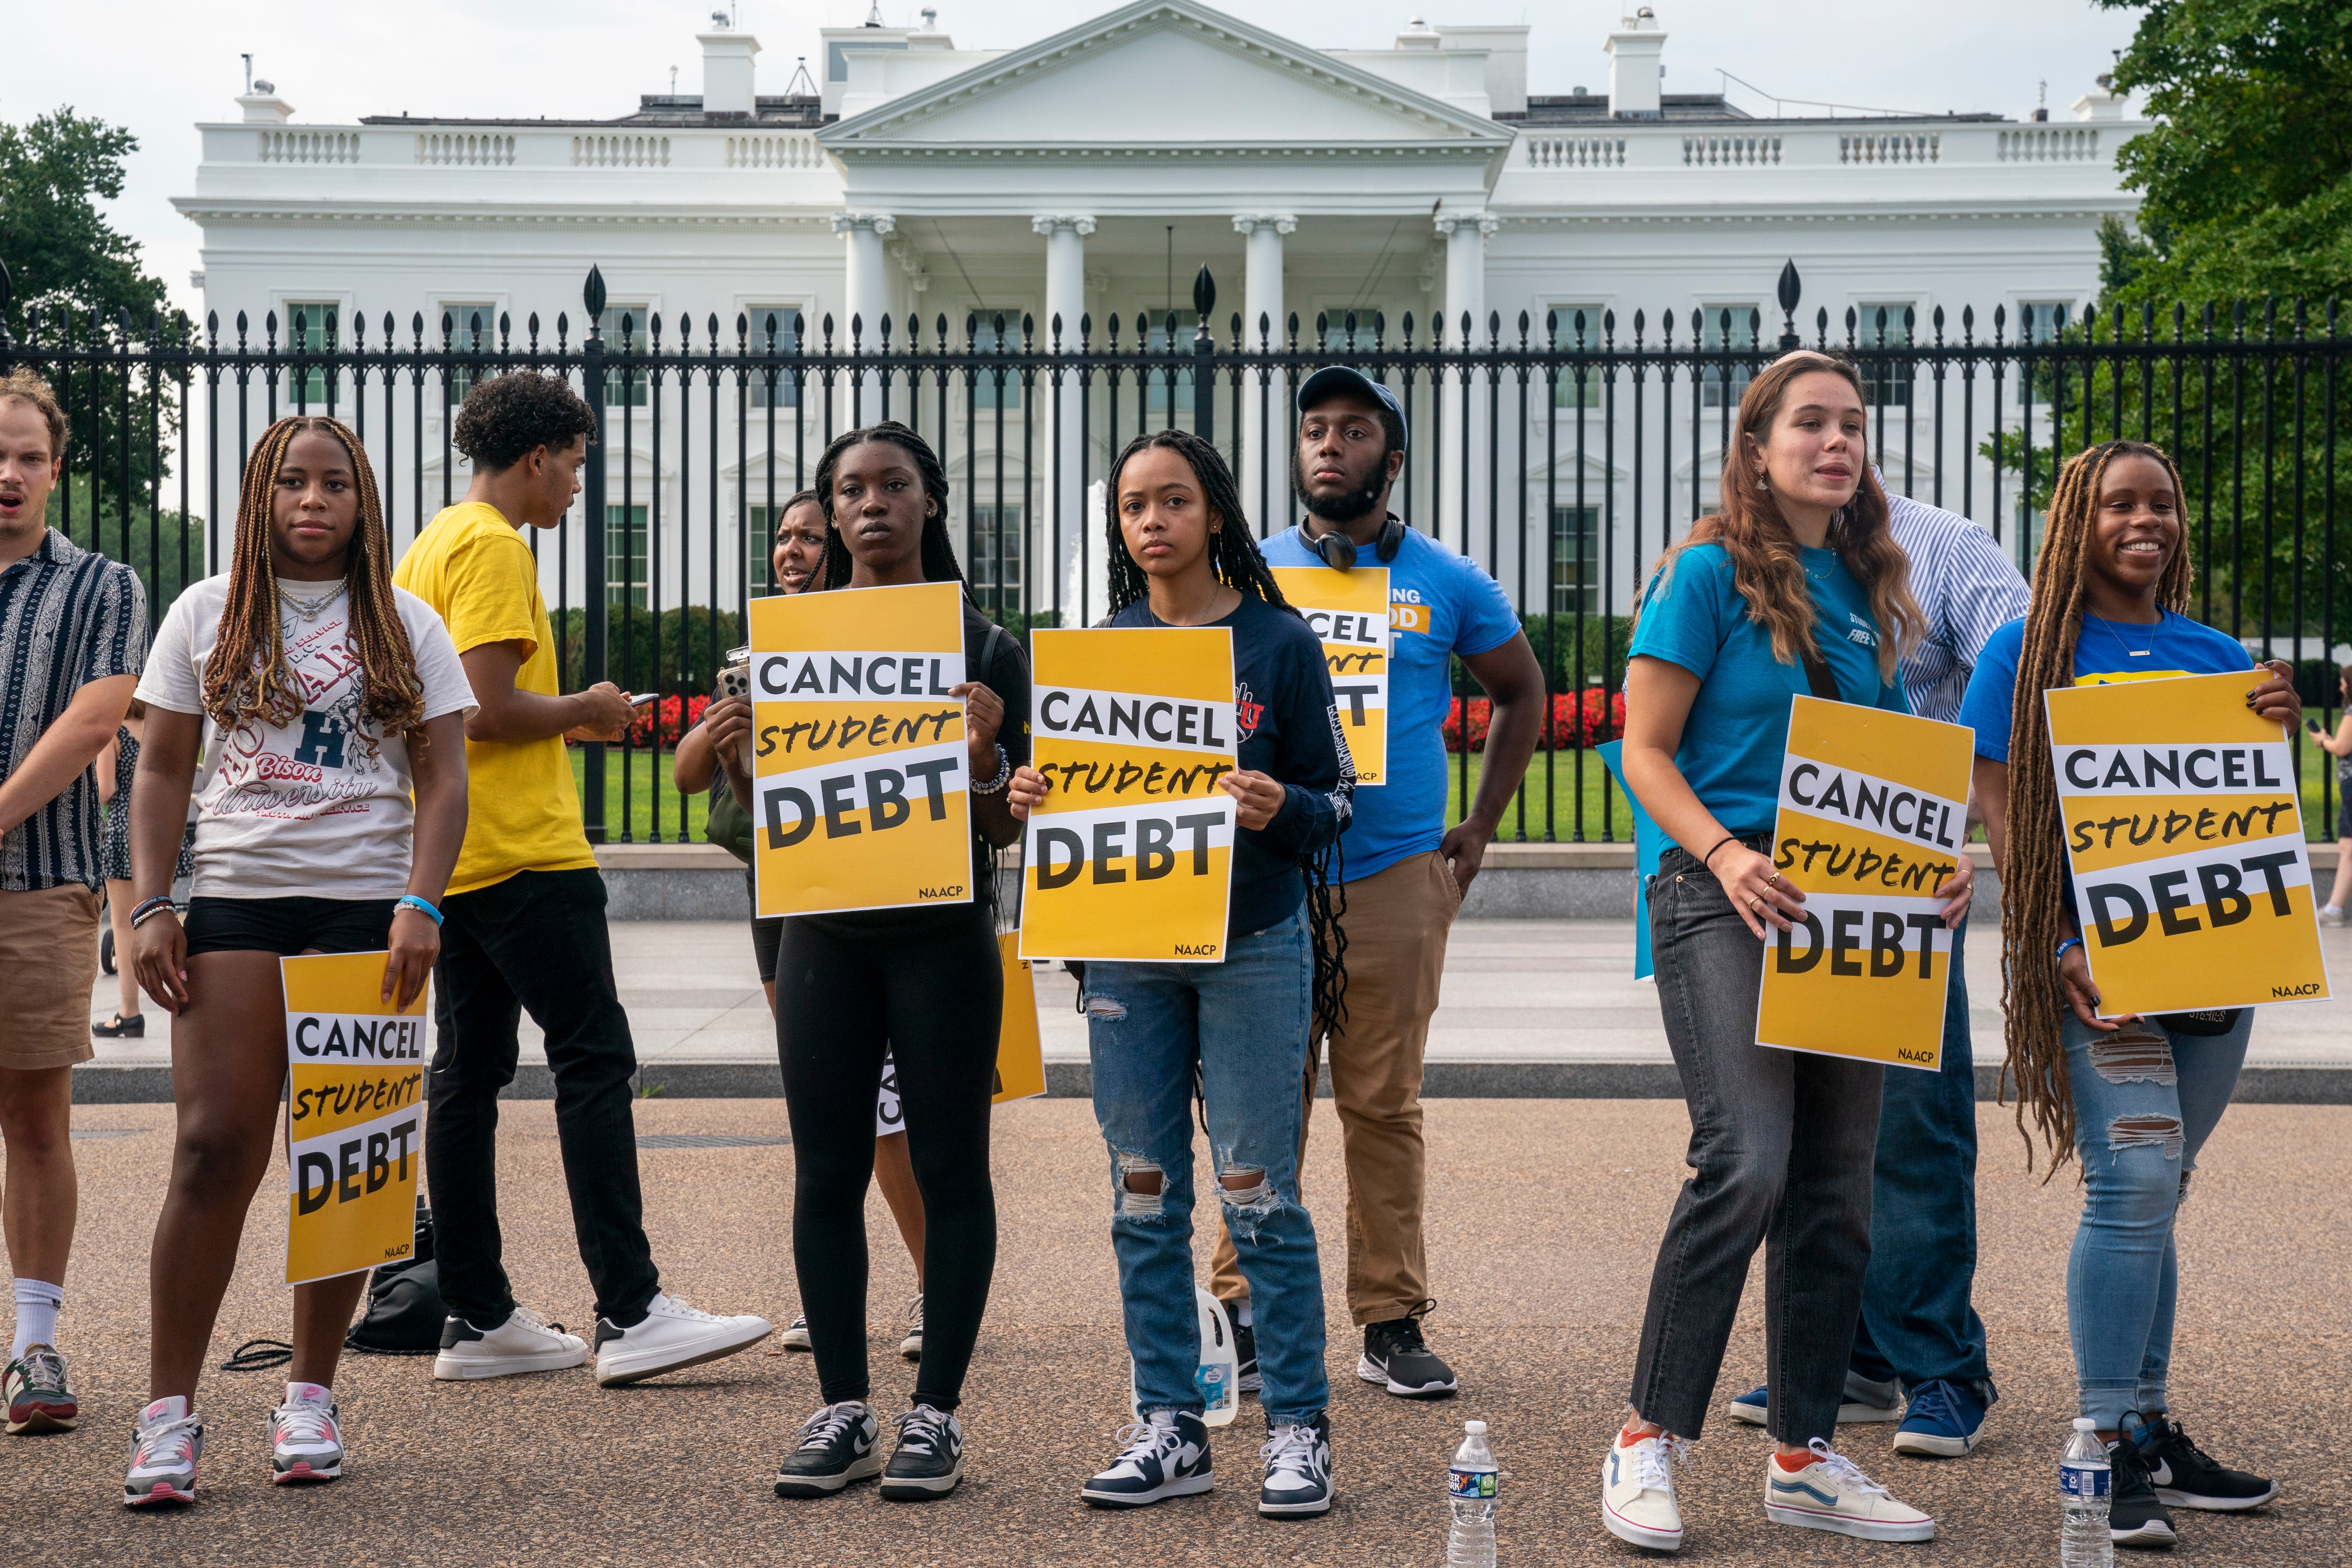 Student loan debt advocates rally outside the White House on 24 August.